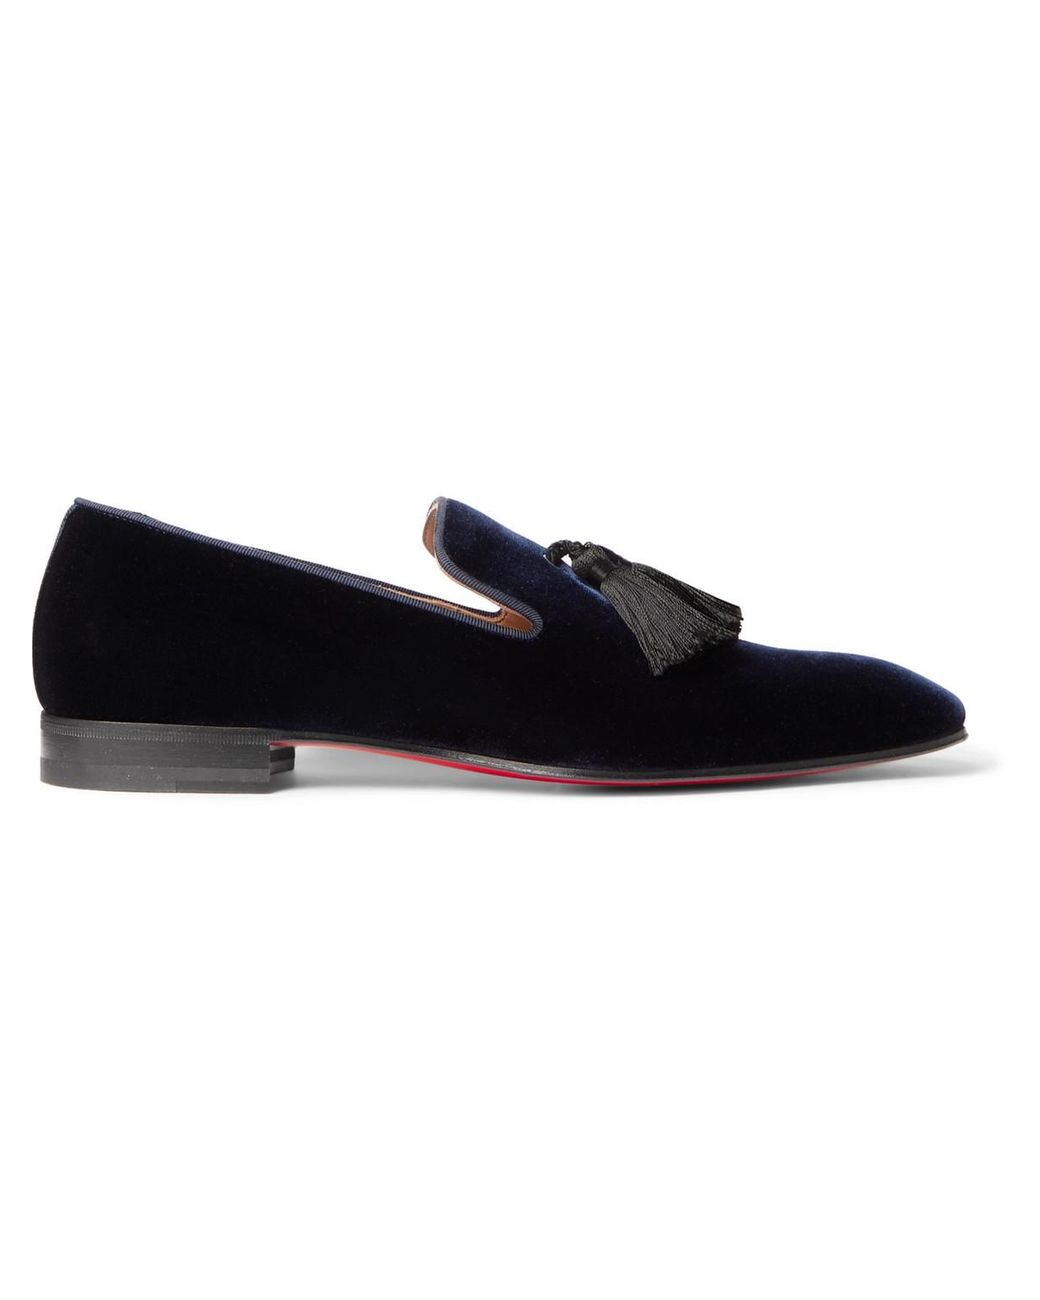 Christian Louboutin Black/gold Officialito Flat Shoes for Men